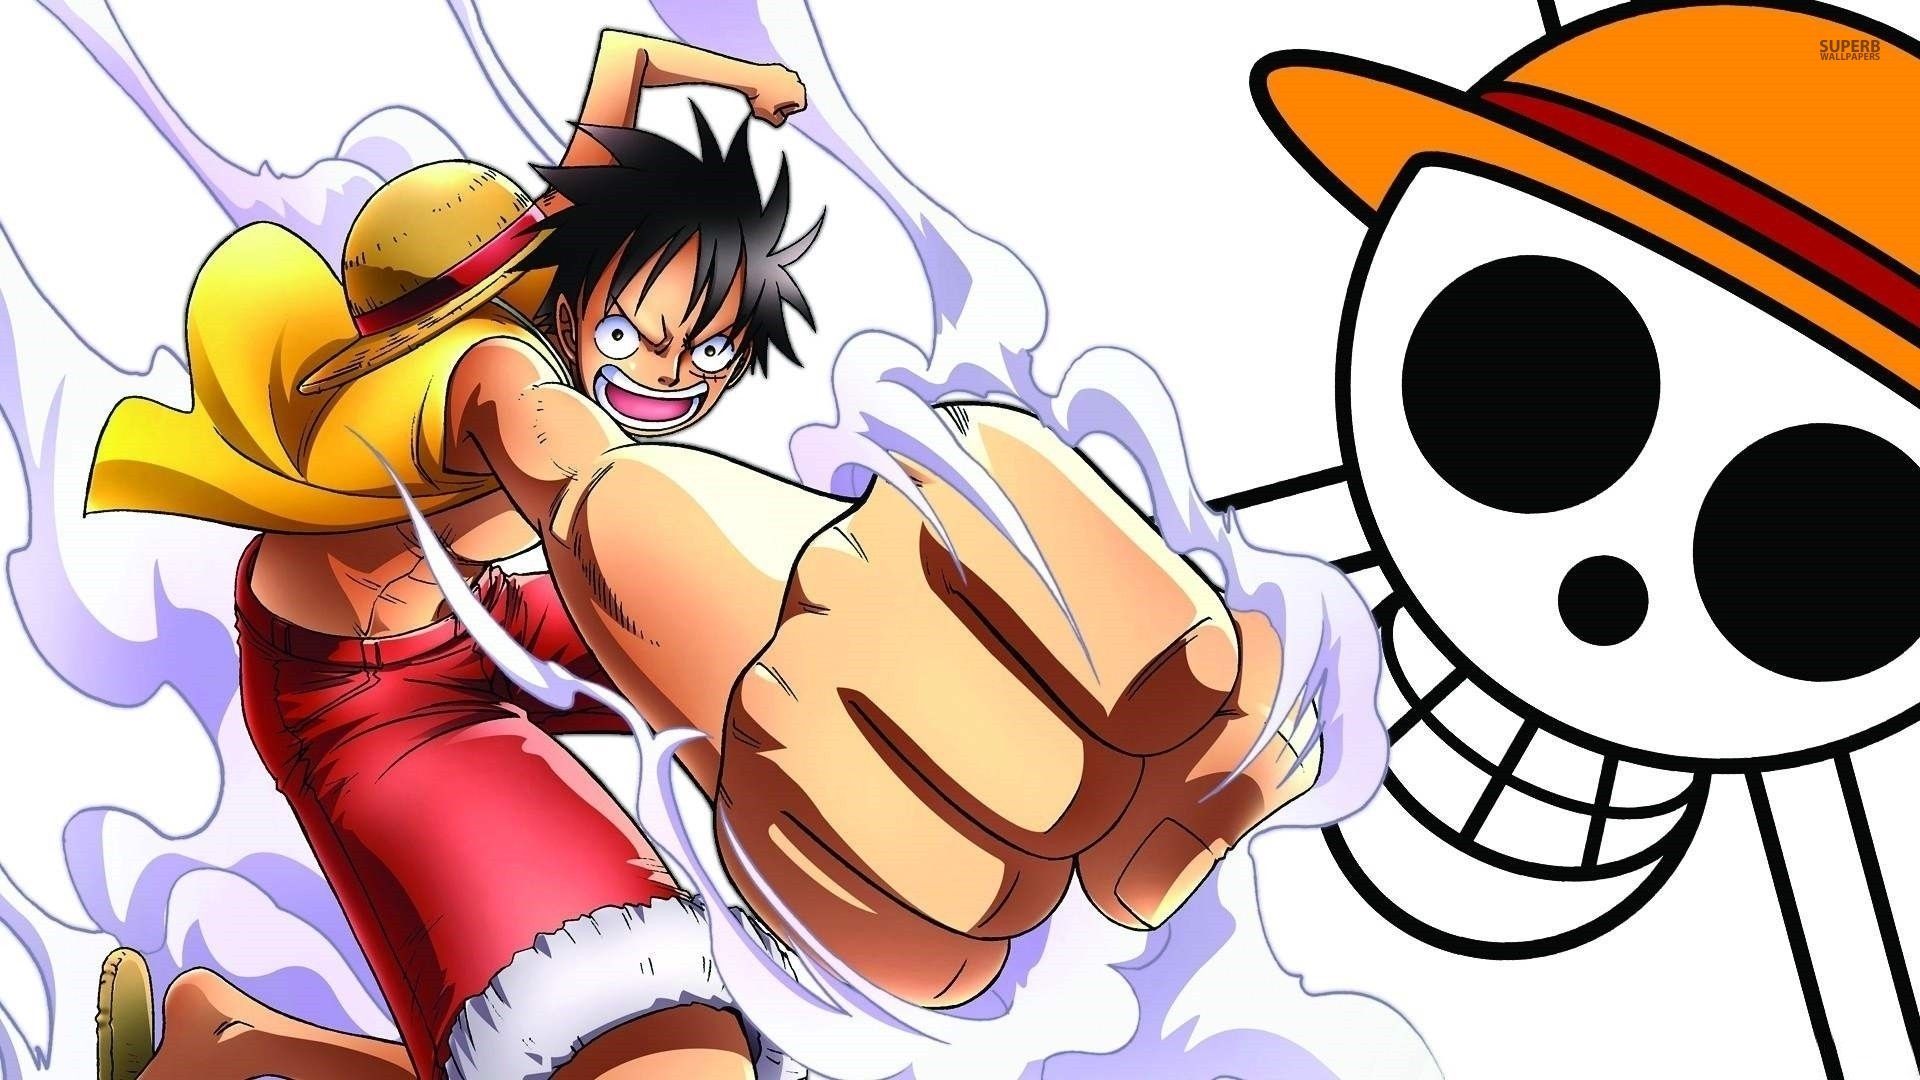 Monkey D. Luffy - One Piece wallpaper - Anime wallpapers - #38772